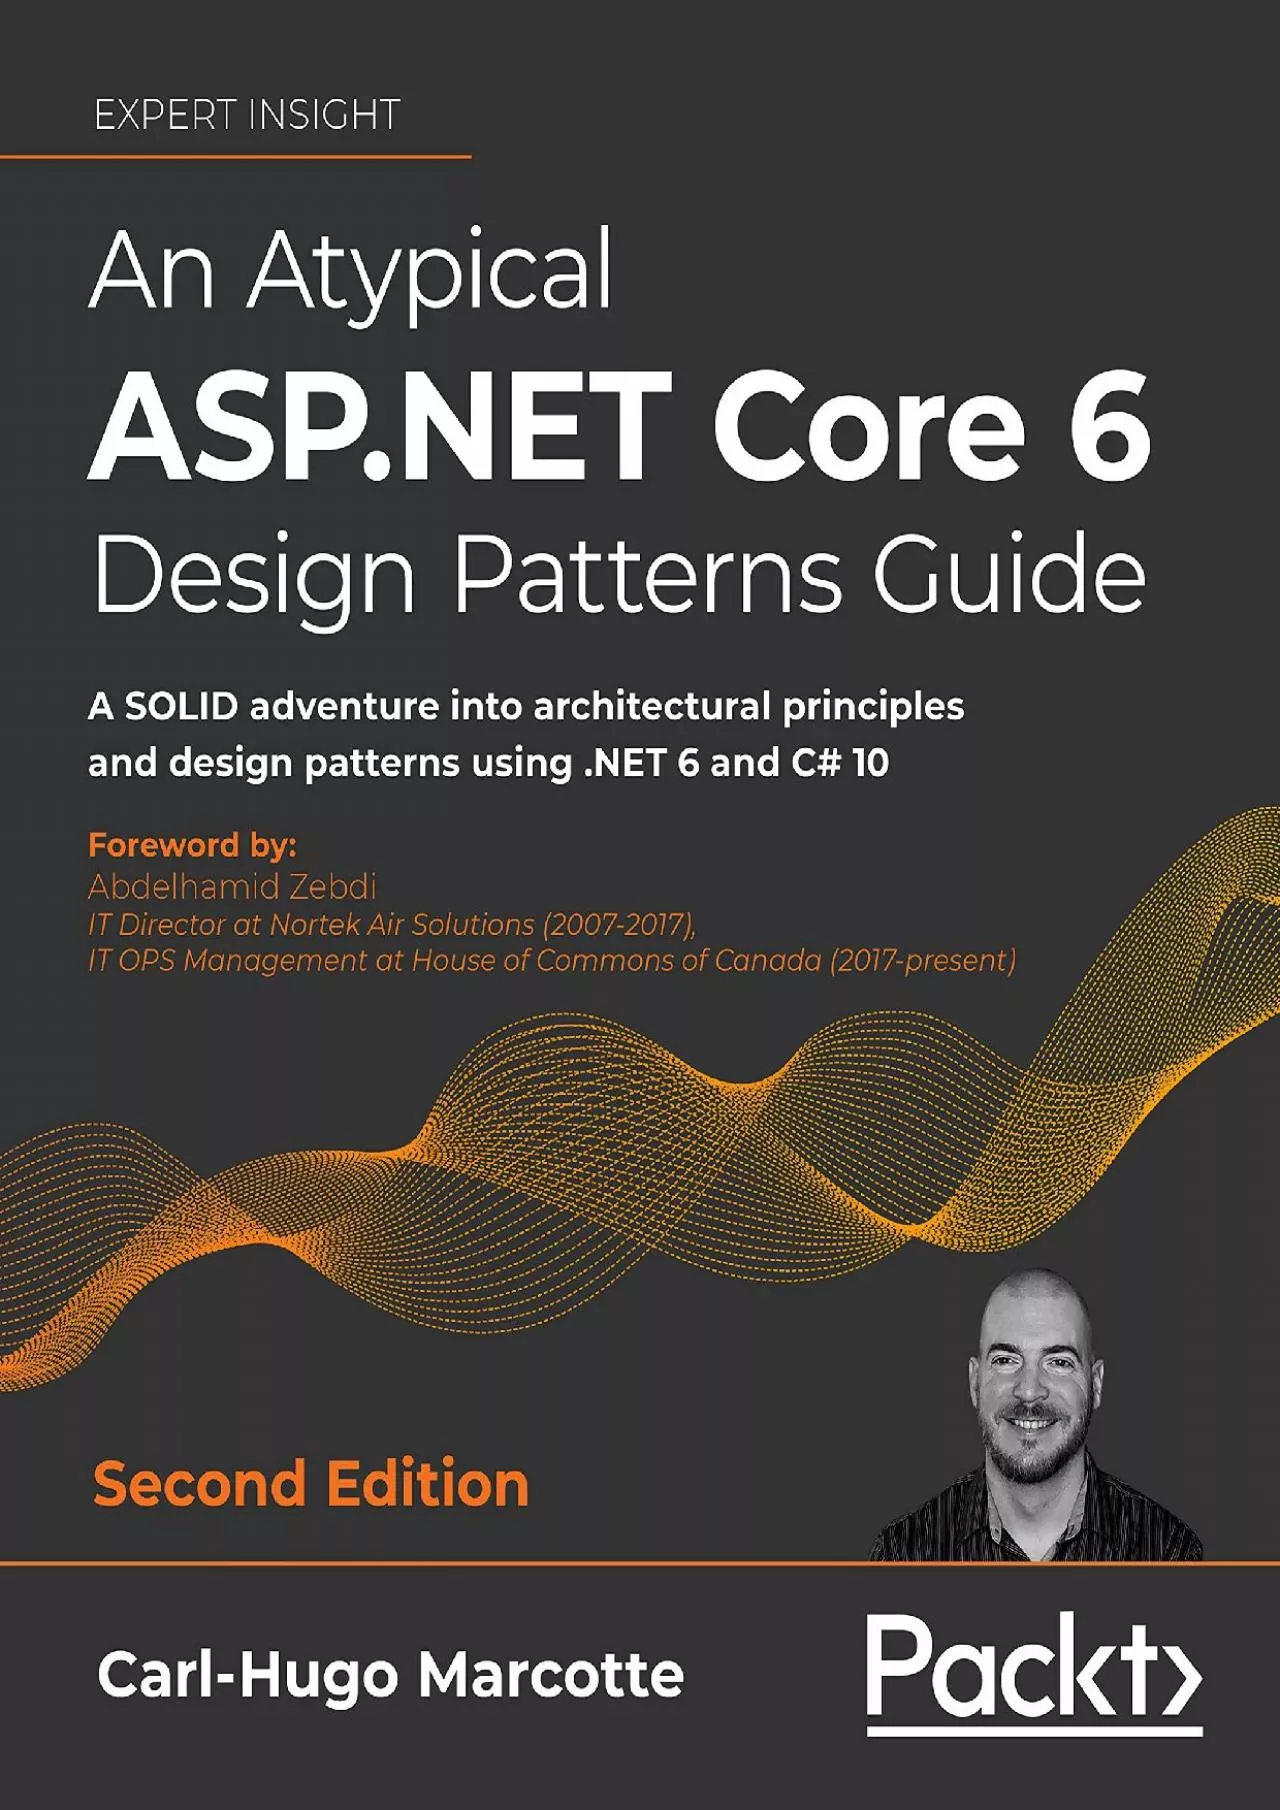 [eBOOK]-An Atypical ASP.NET Core 6 Design Patterns Guide: A SOLID adventure into architectural